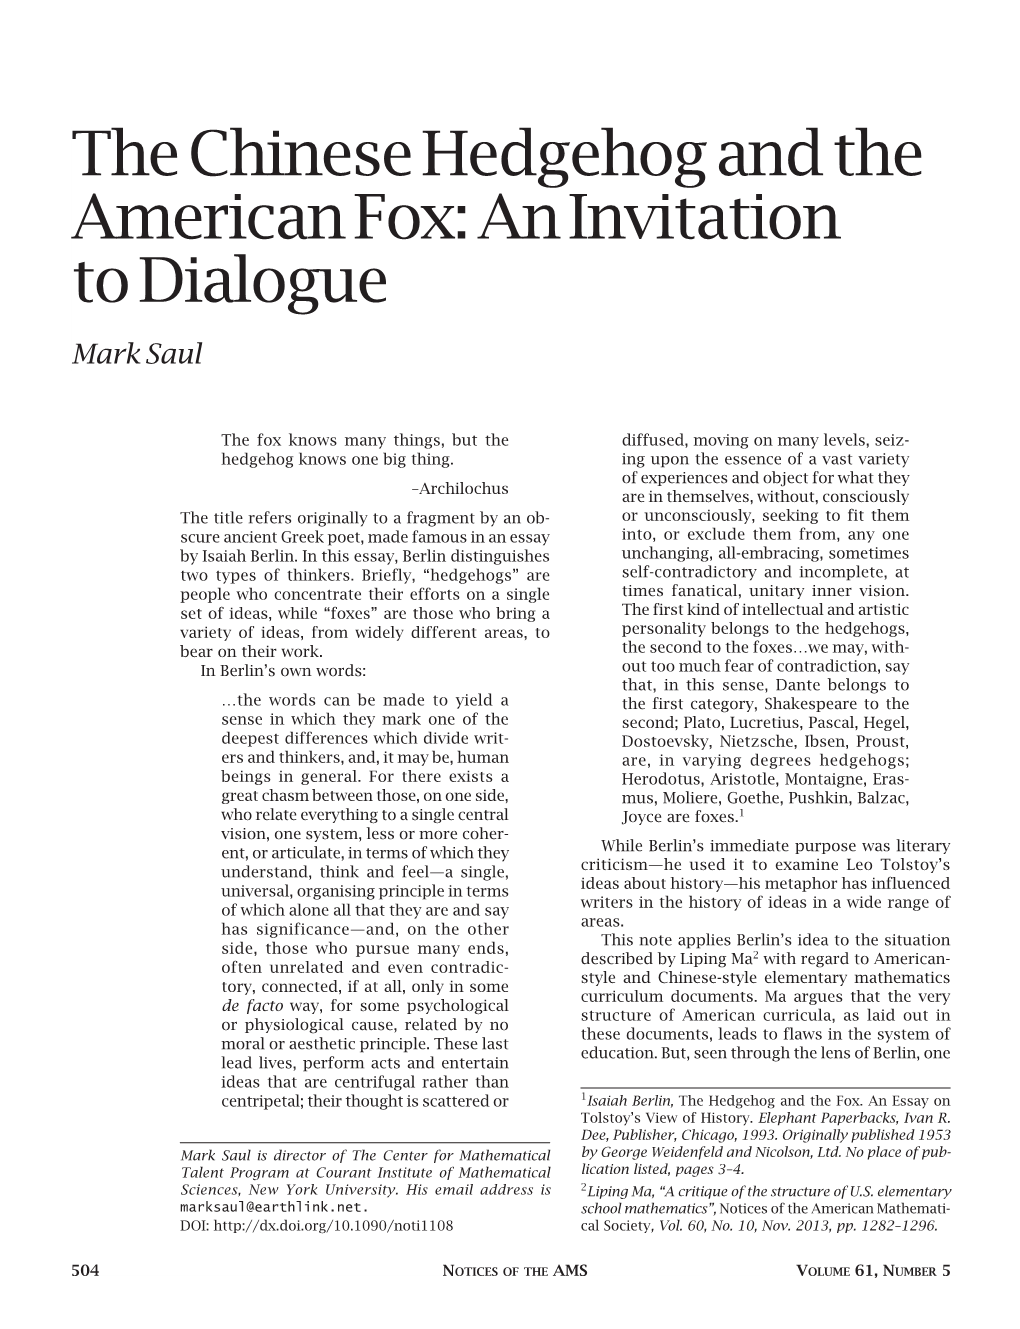 The Chinese Hedgehog and the American Fox: an Invitation to Dialogue Mark Saul